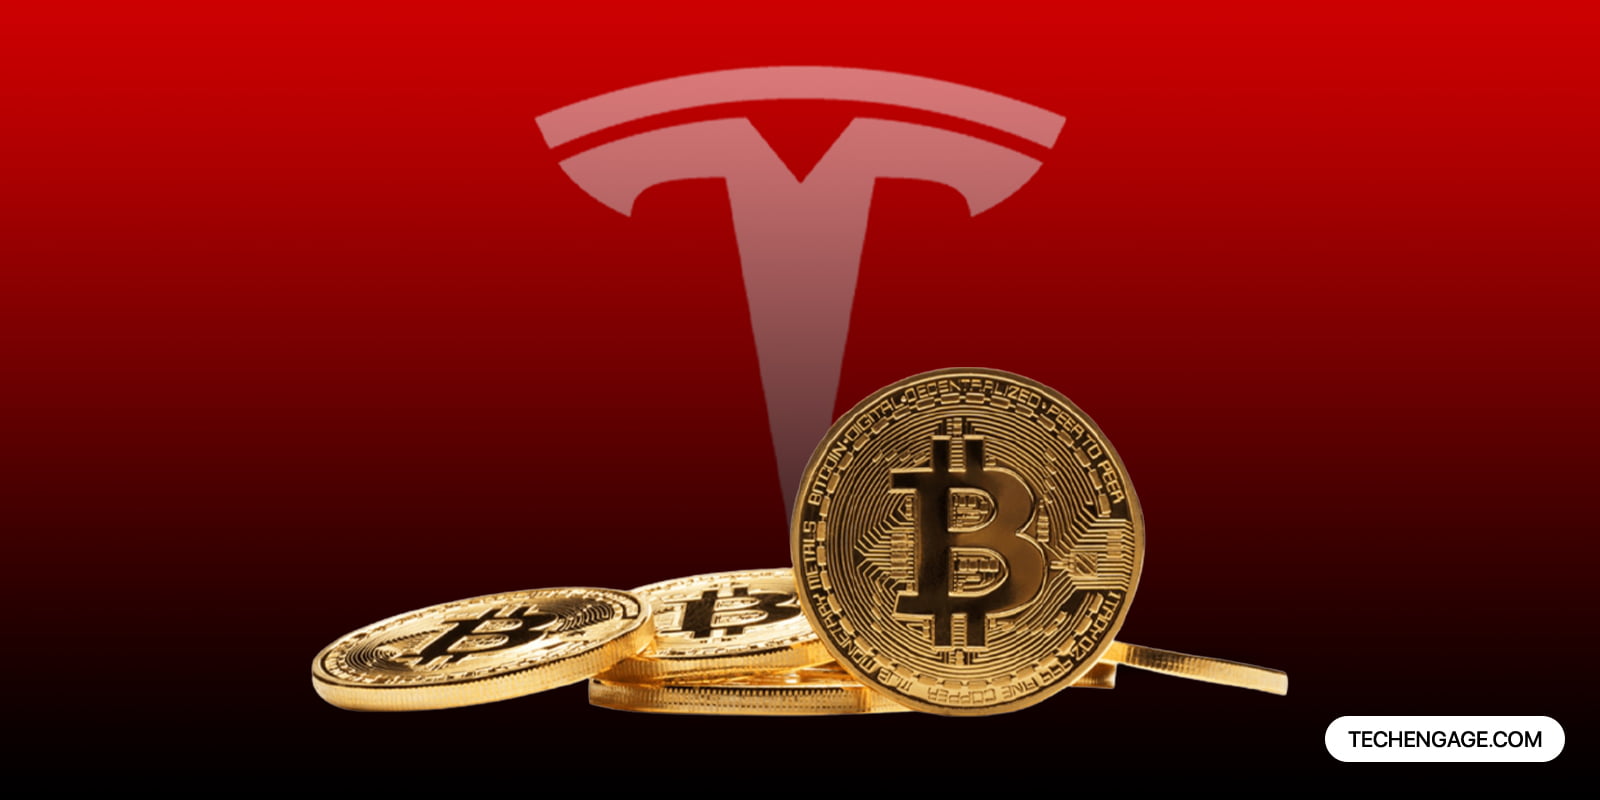 Tesla Buys $1.5 Billion In Bitcoin, Triggering Price To An All-Time High